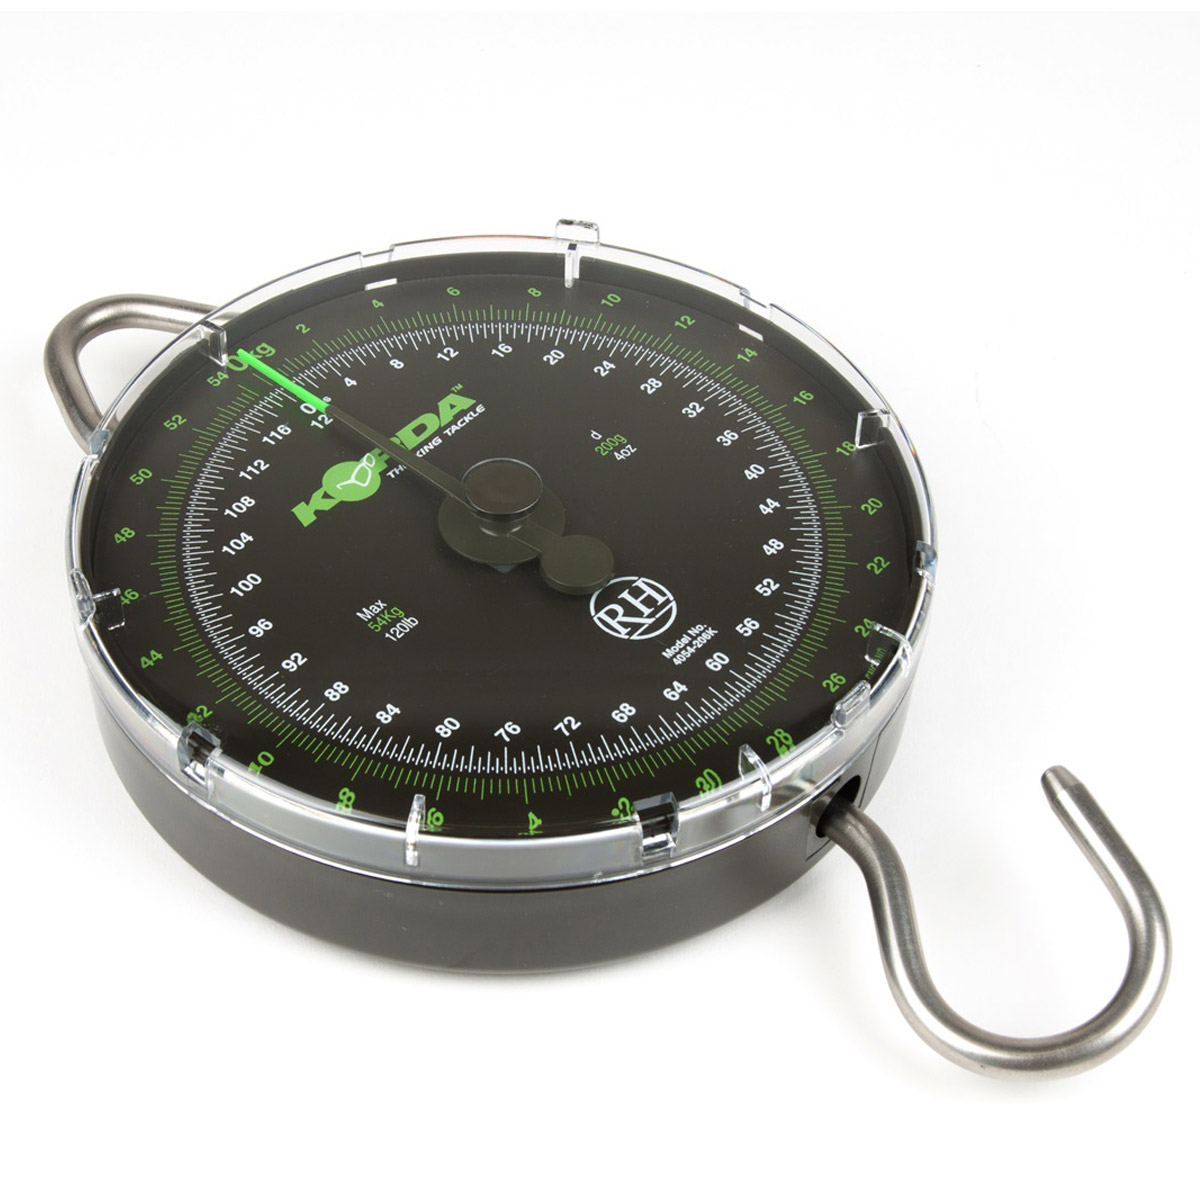 Korda Limited Edition Scales -  120 lb